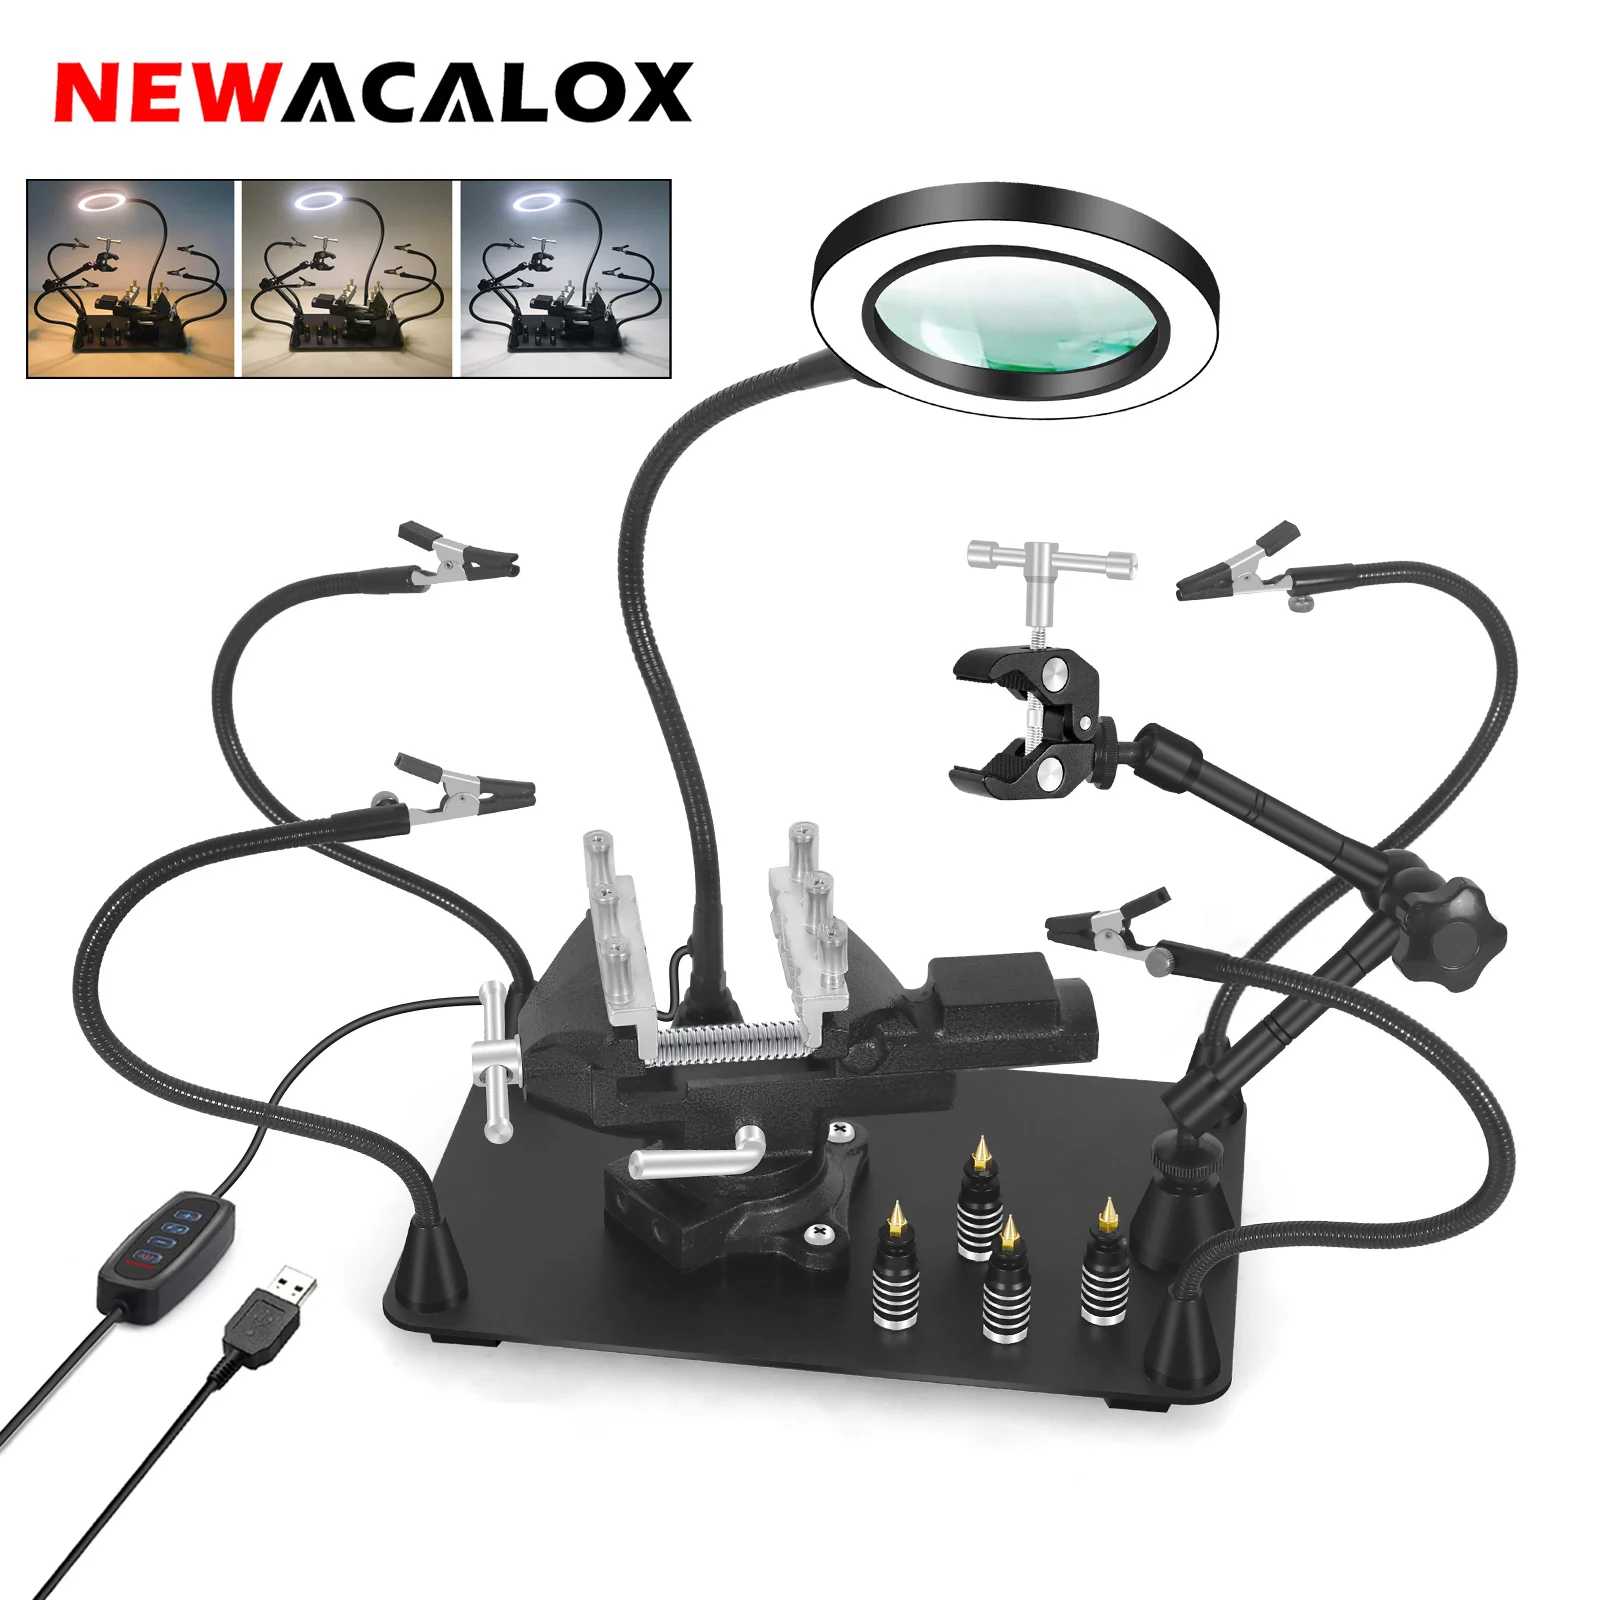 NEWACALOX Magnetic Helping Hands Soldering Third Hand PCB Circuit Board Holder with 5X LED Magnifying Lamp 360 Heat Gun Holder newacalox magnetic helping hands soldering third hand pcb circuit board holder with 5x led magnifying lamp 360 heat gun holder